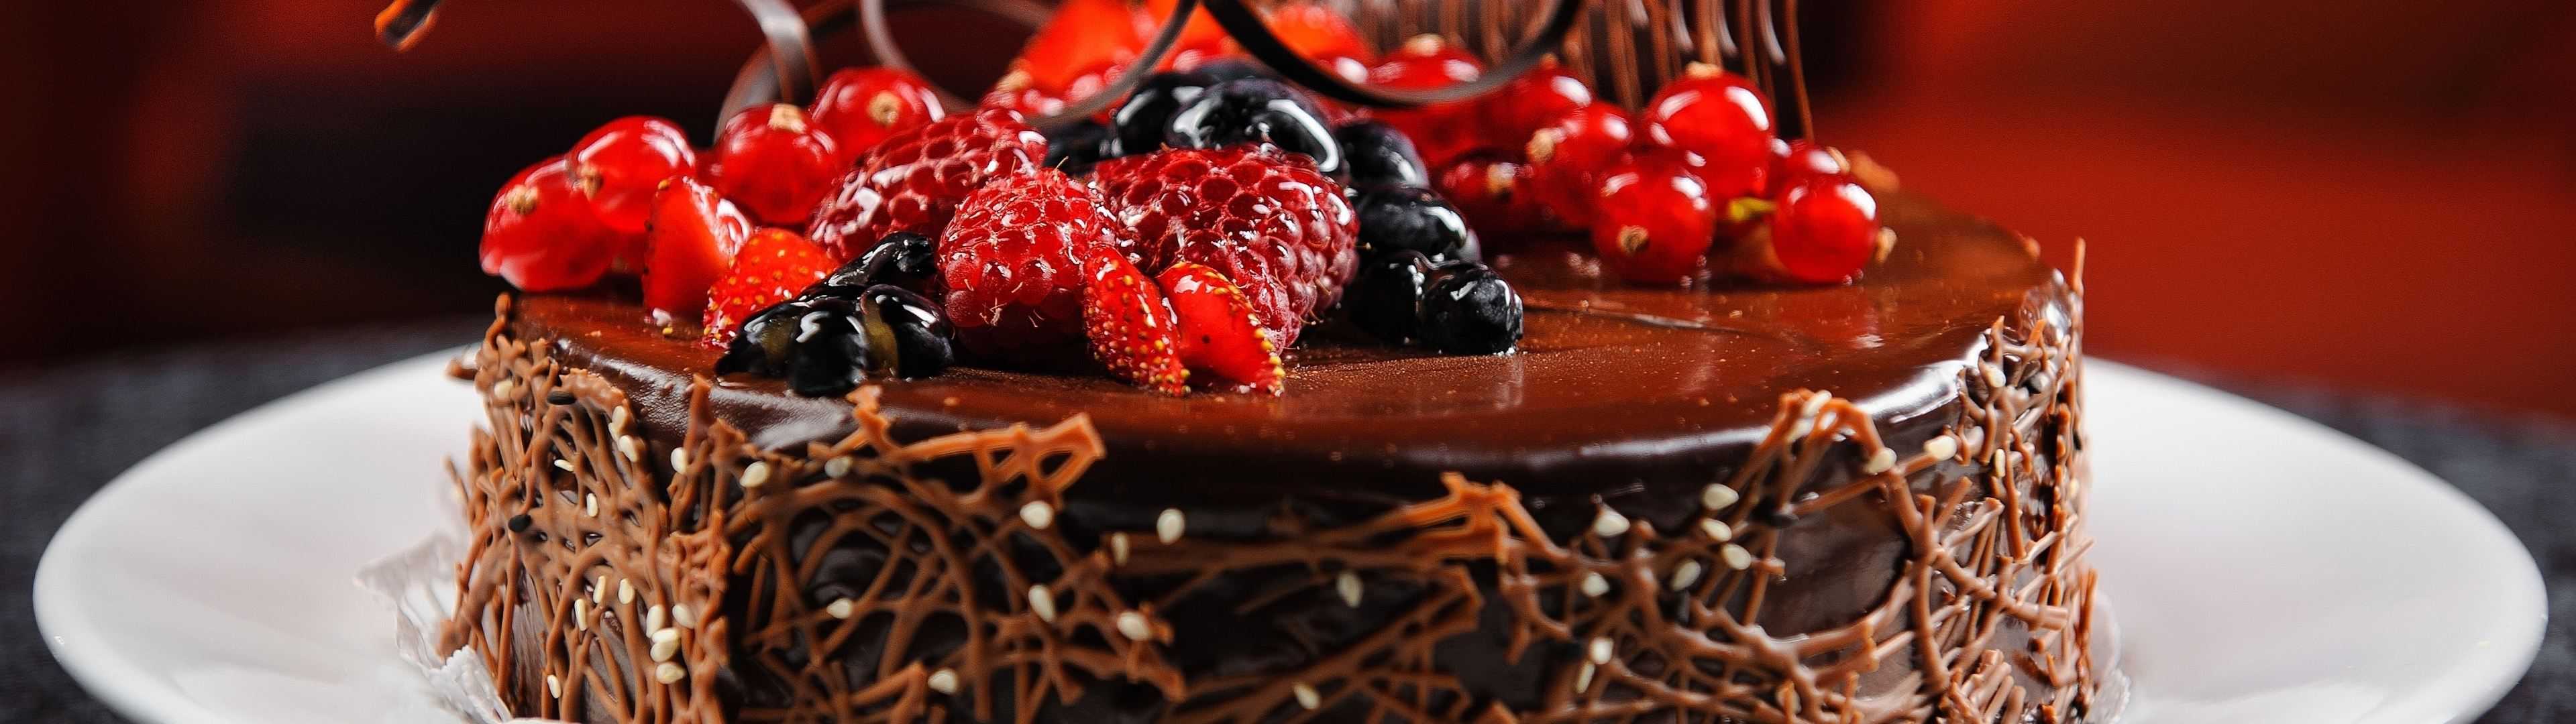 chocolate cake topped with fruits dual monitor wallpaper